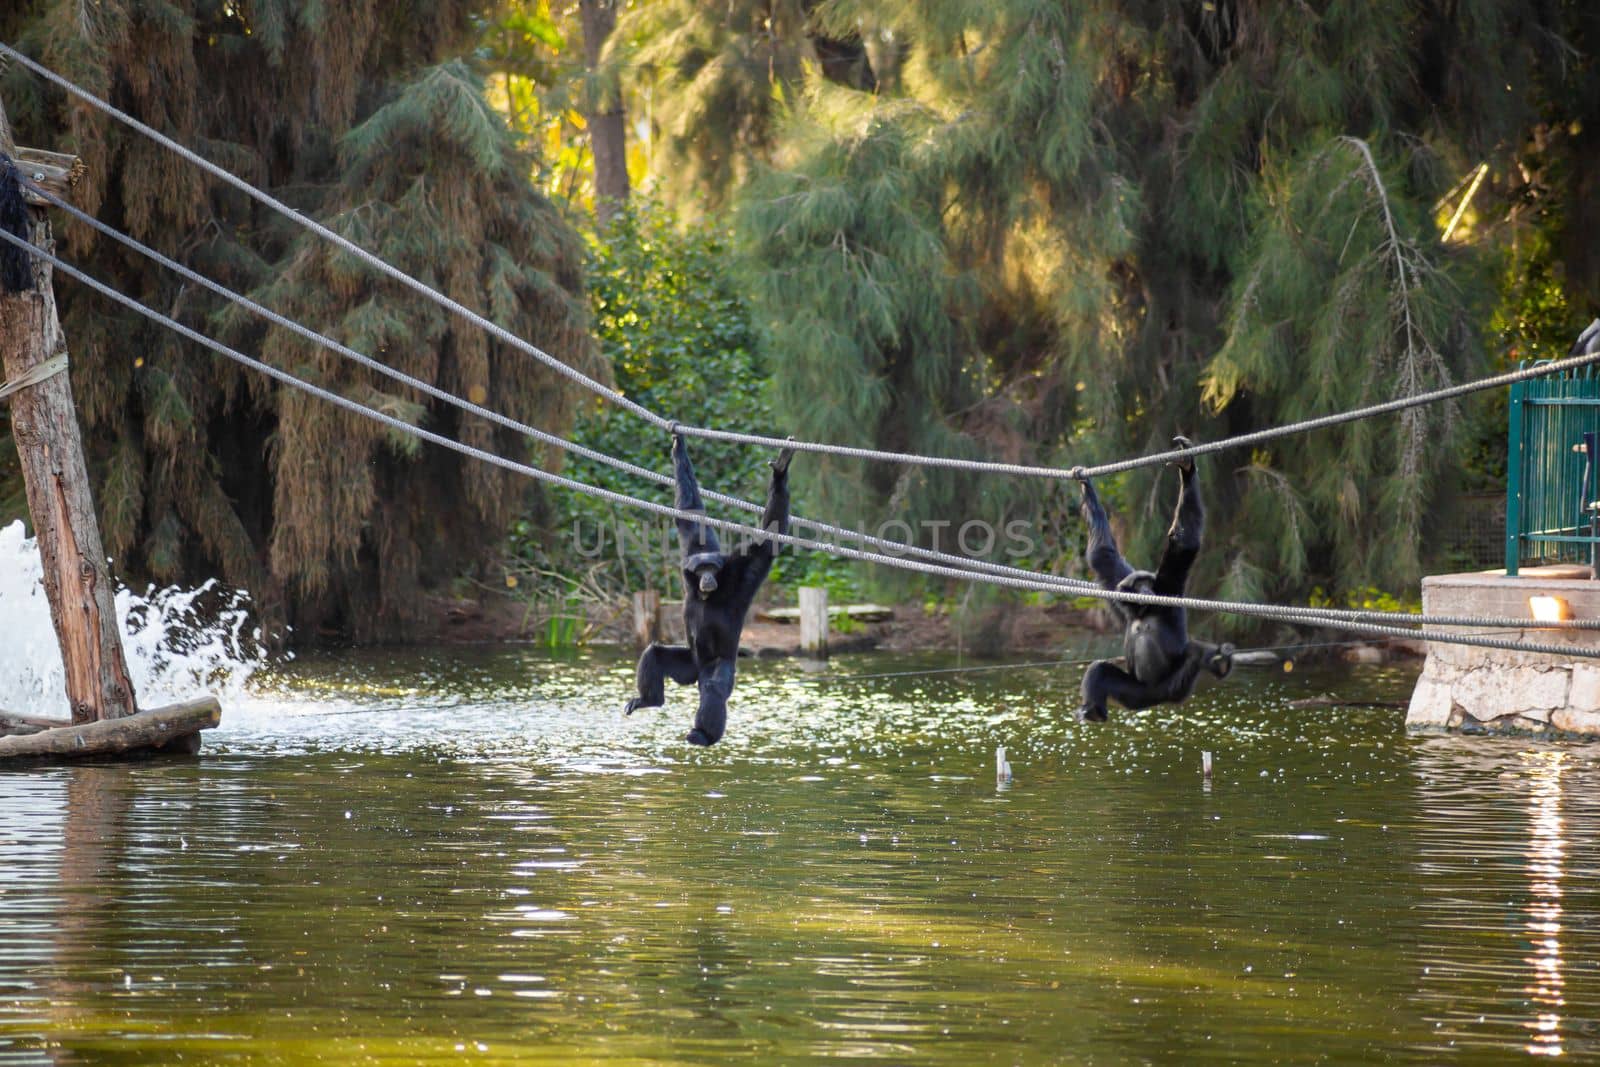 Gorillas have fun in the rope park.